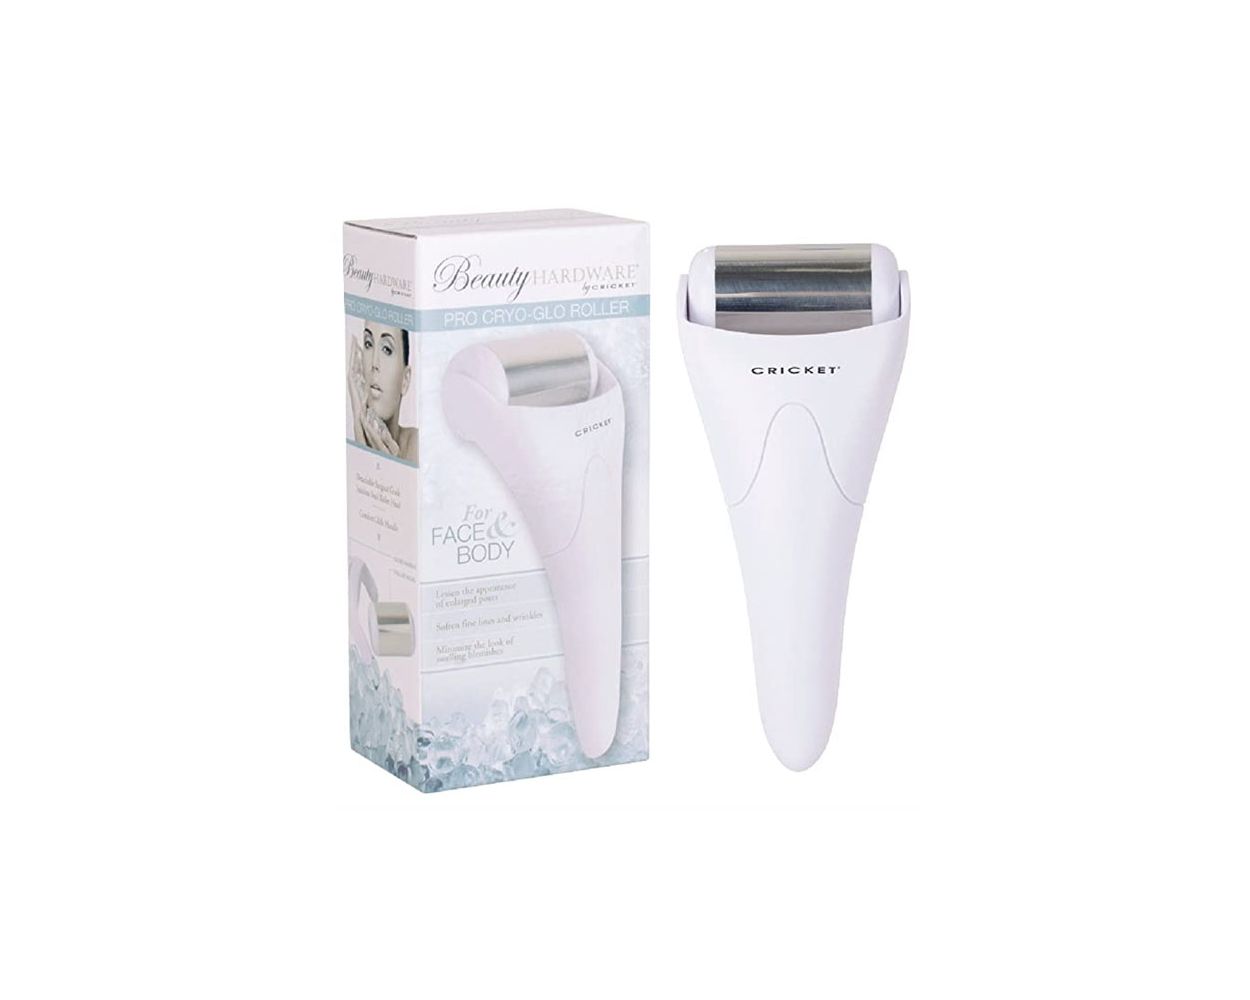 Pro Cryo-Clo Roller For Face & Body